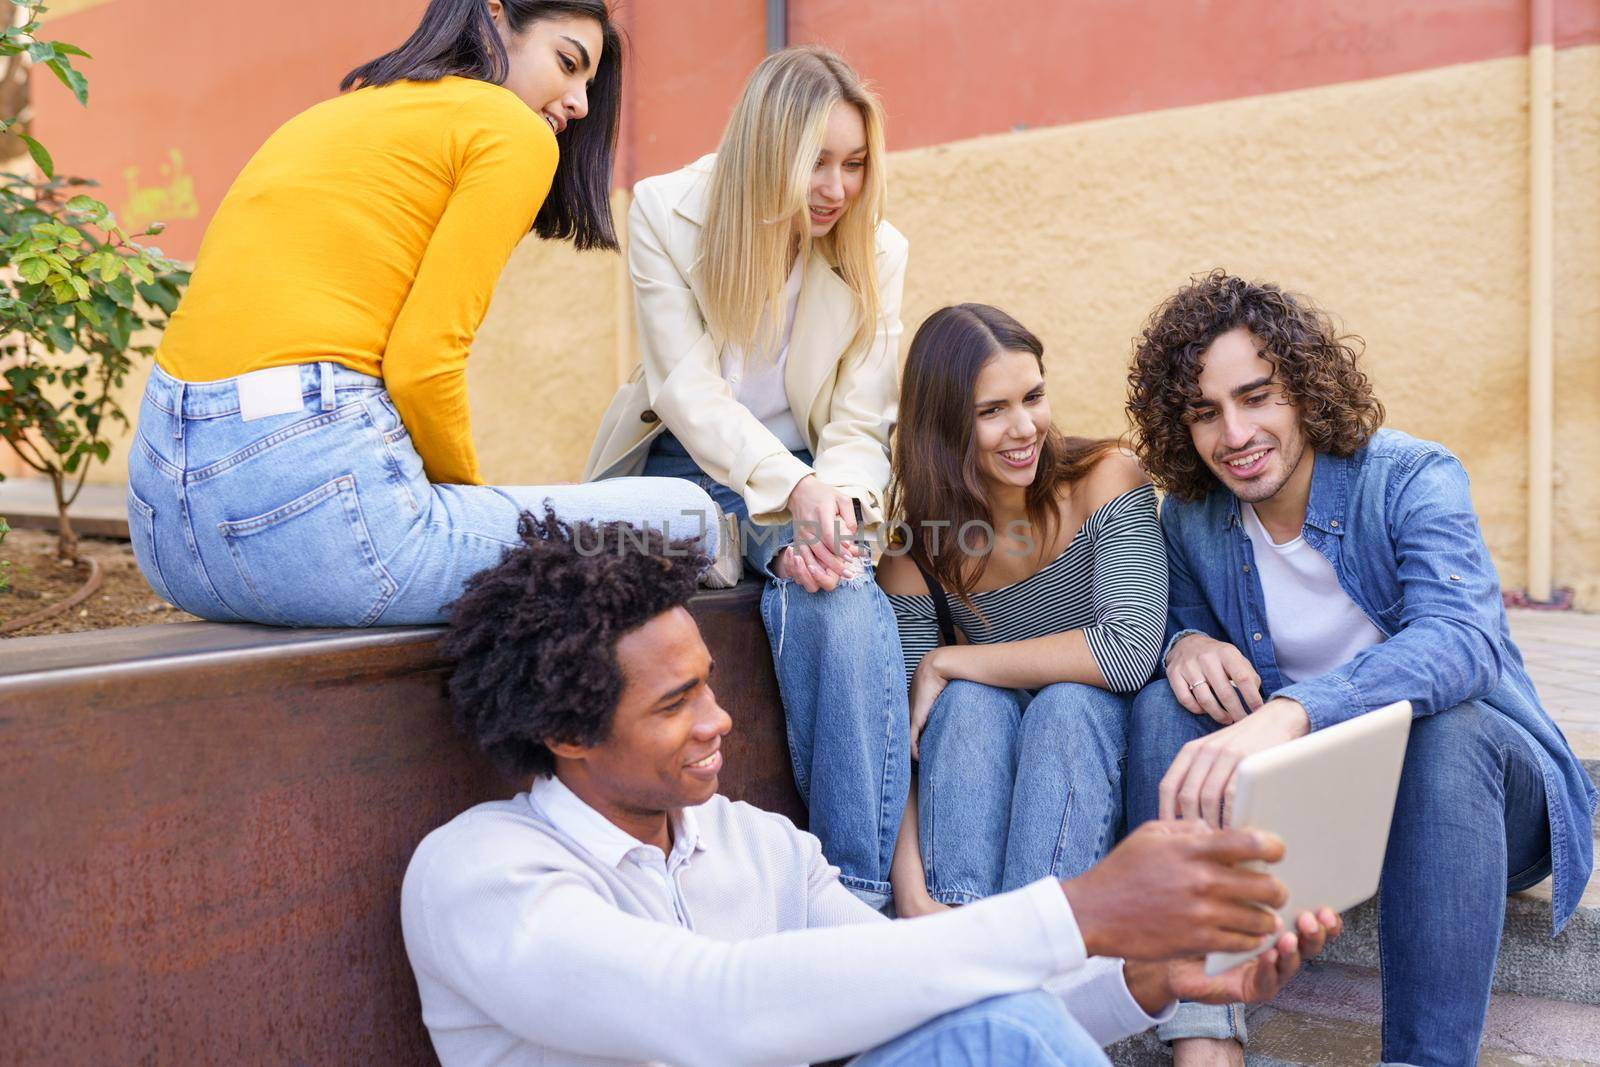 Multi-ethnic group of young people looking at a digital tablet outdoors in urban background. Group of men and woman sitting together on steps.